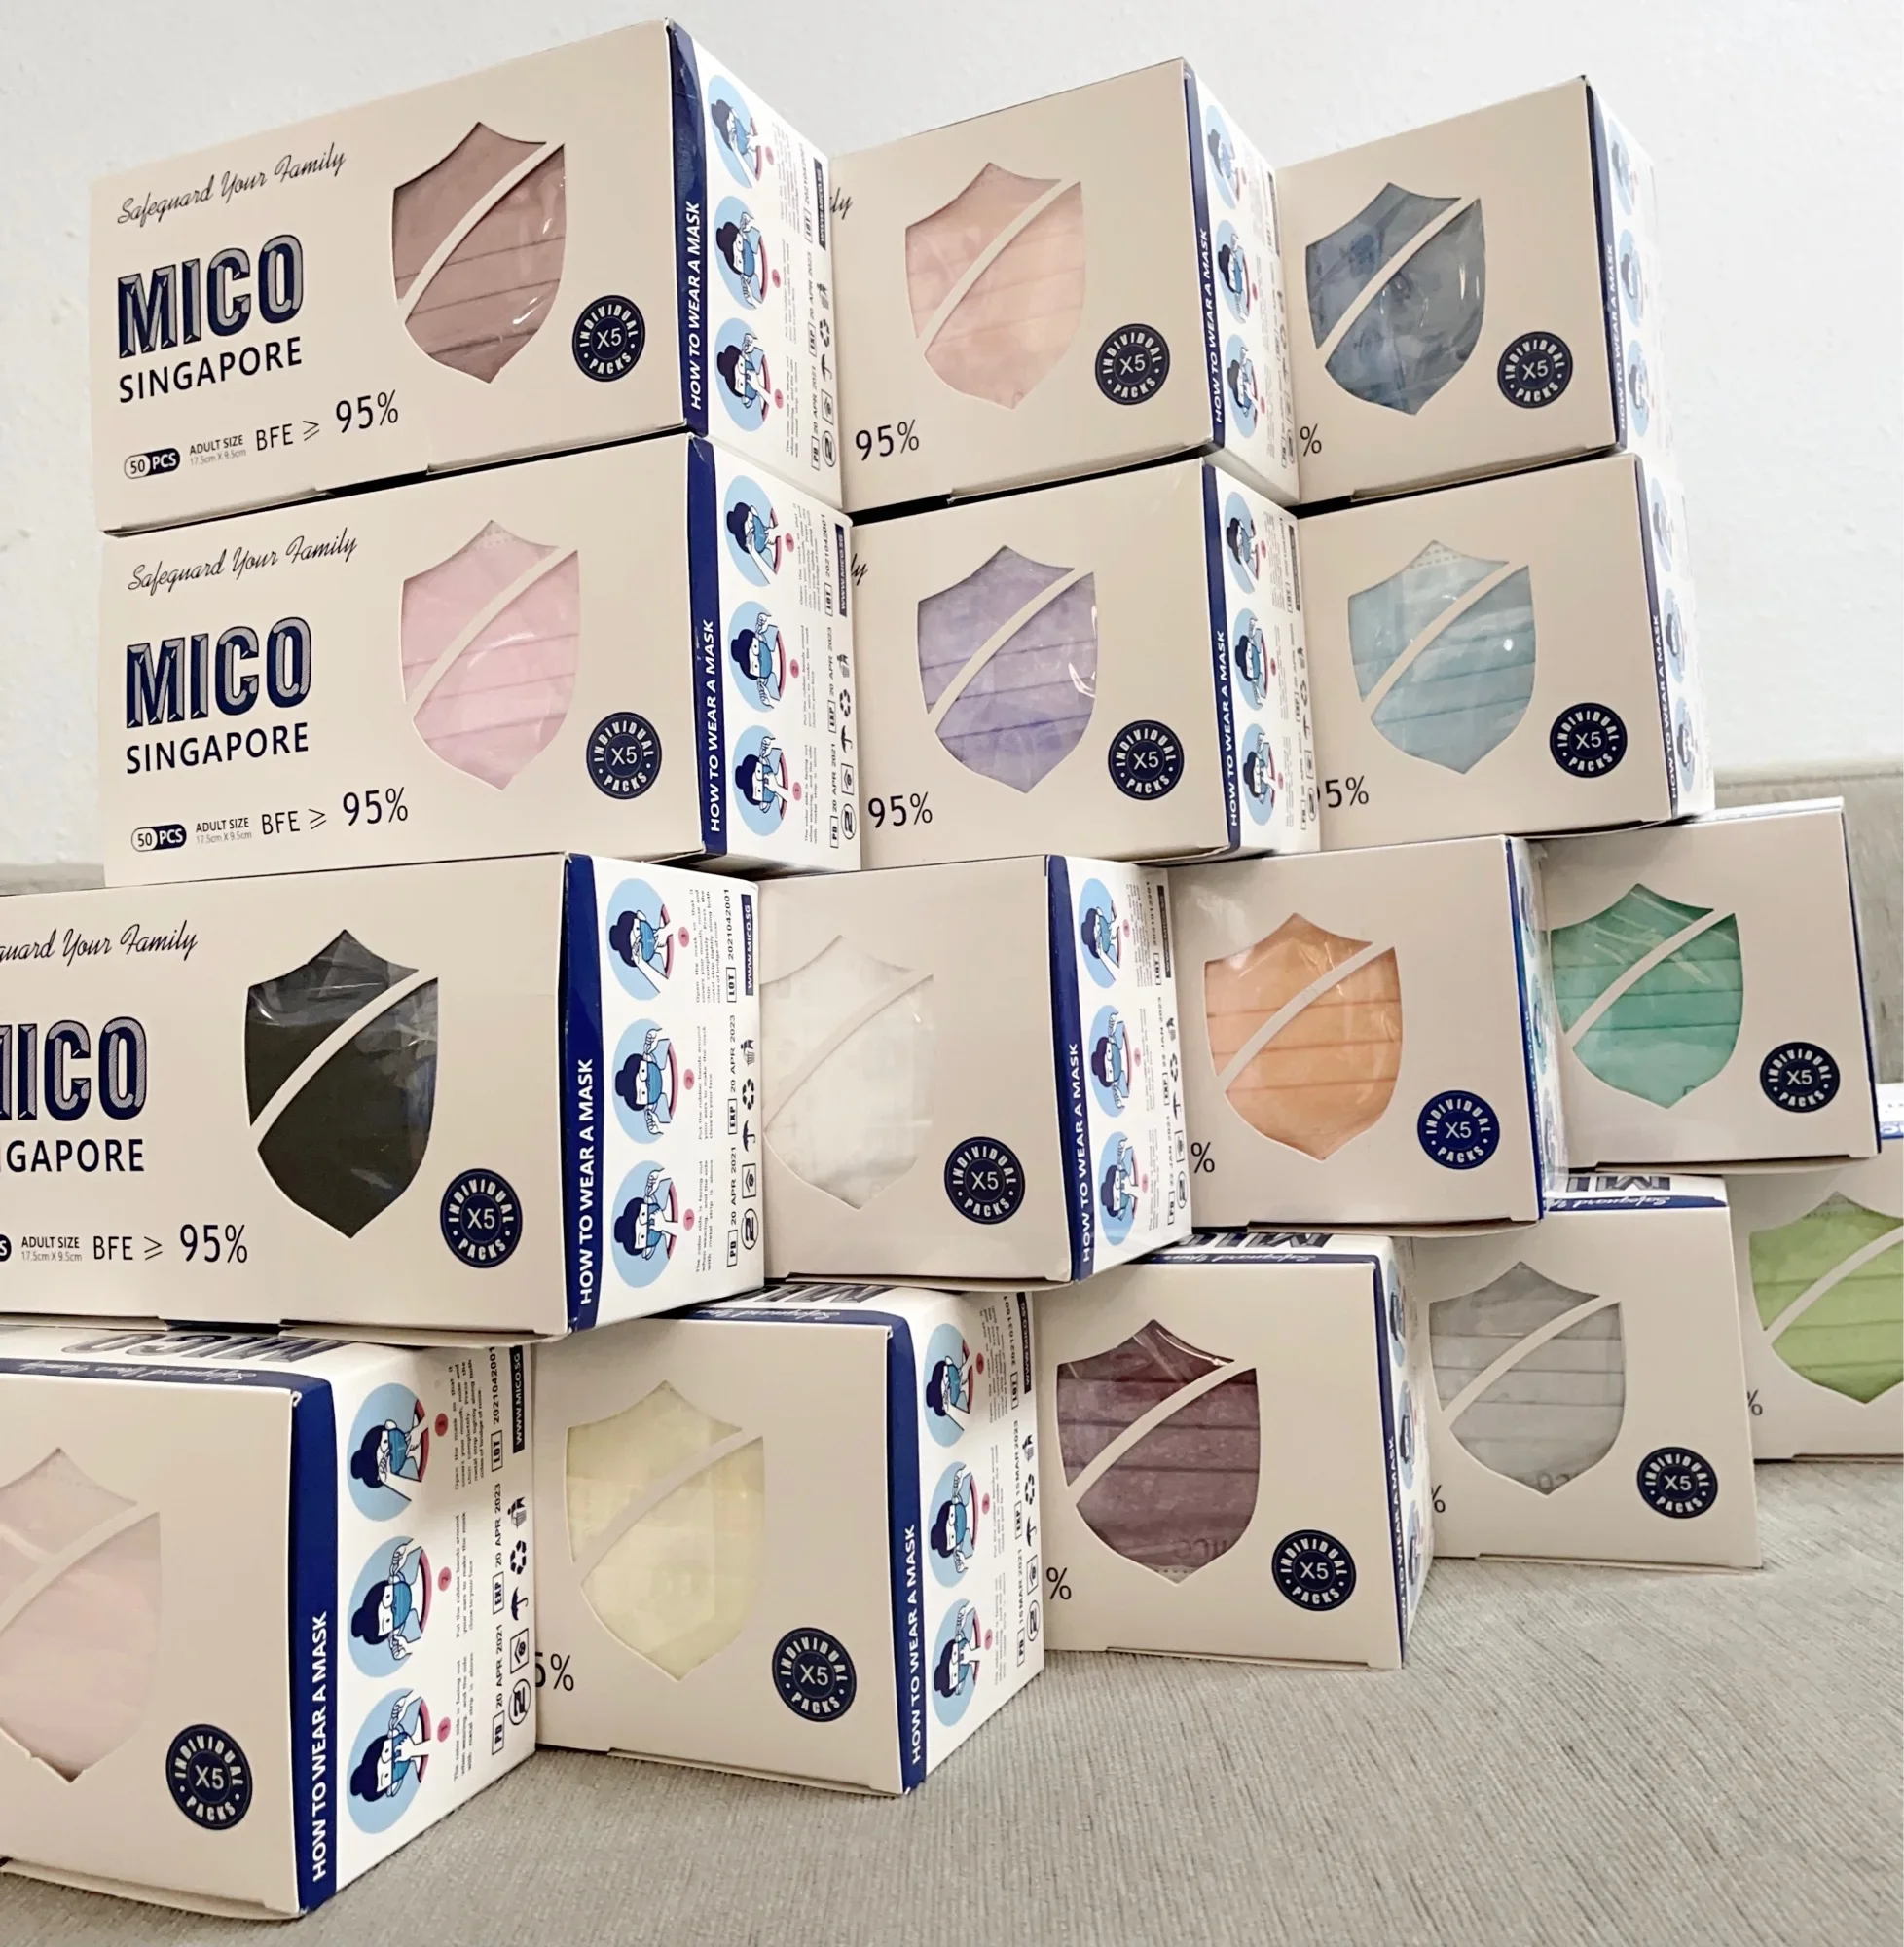 [SG BRAND] MICO Adult 3ply Disposable Mask BFE》95% Face Mask 50pcs/box [Ready Stock]